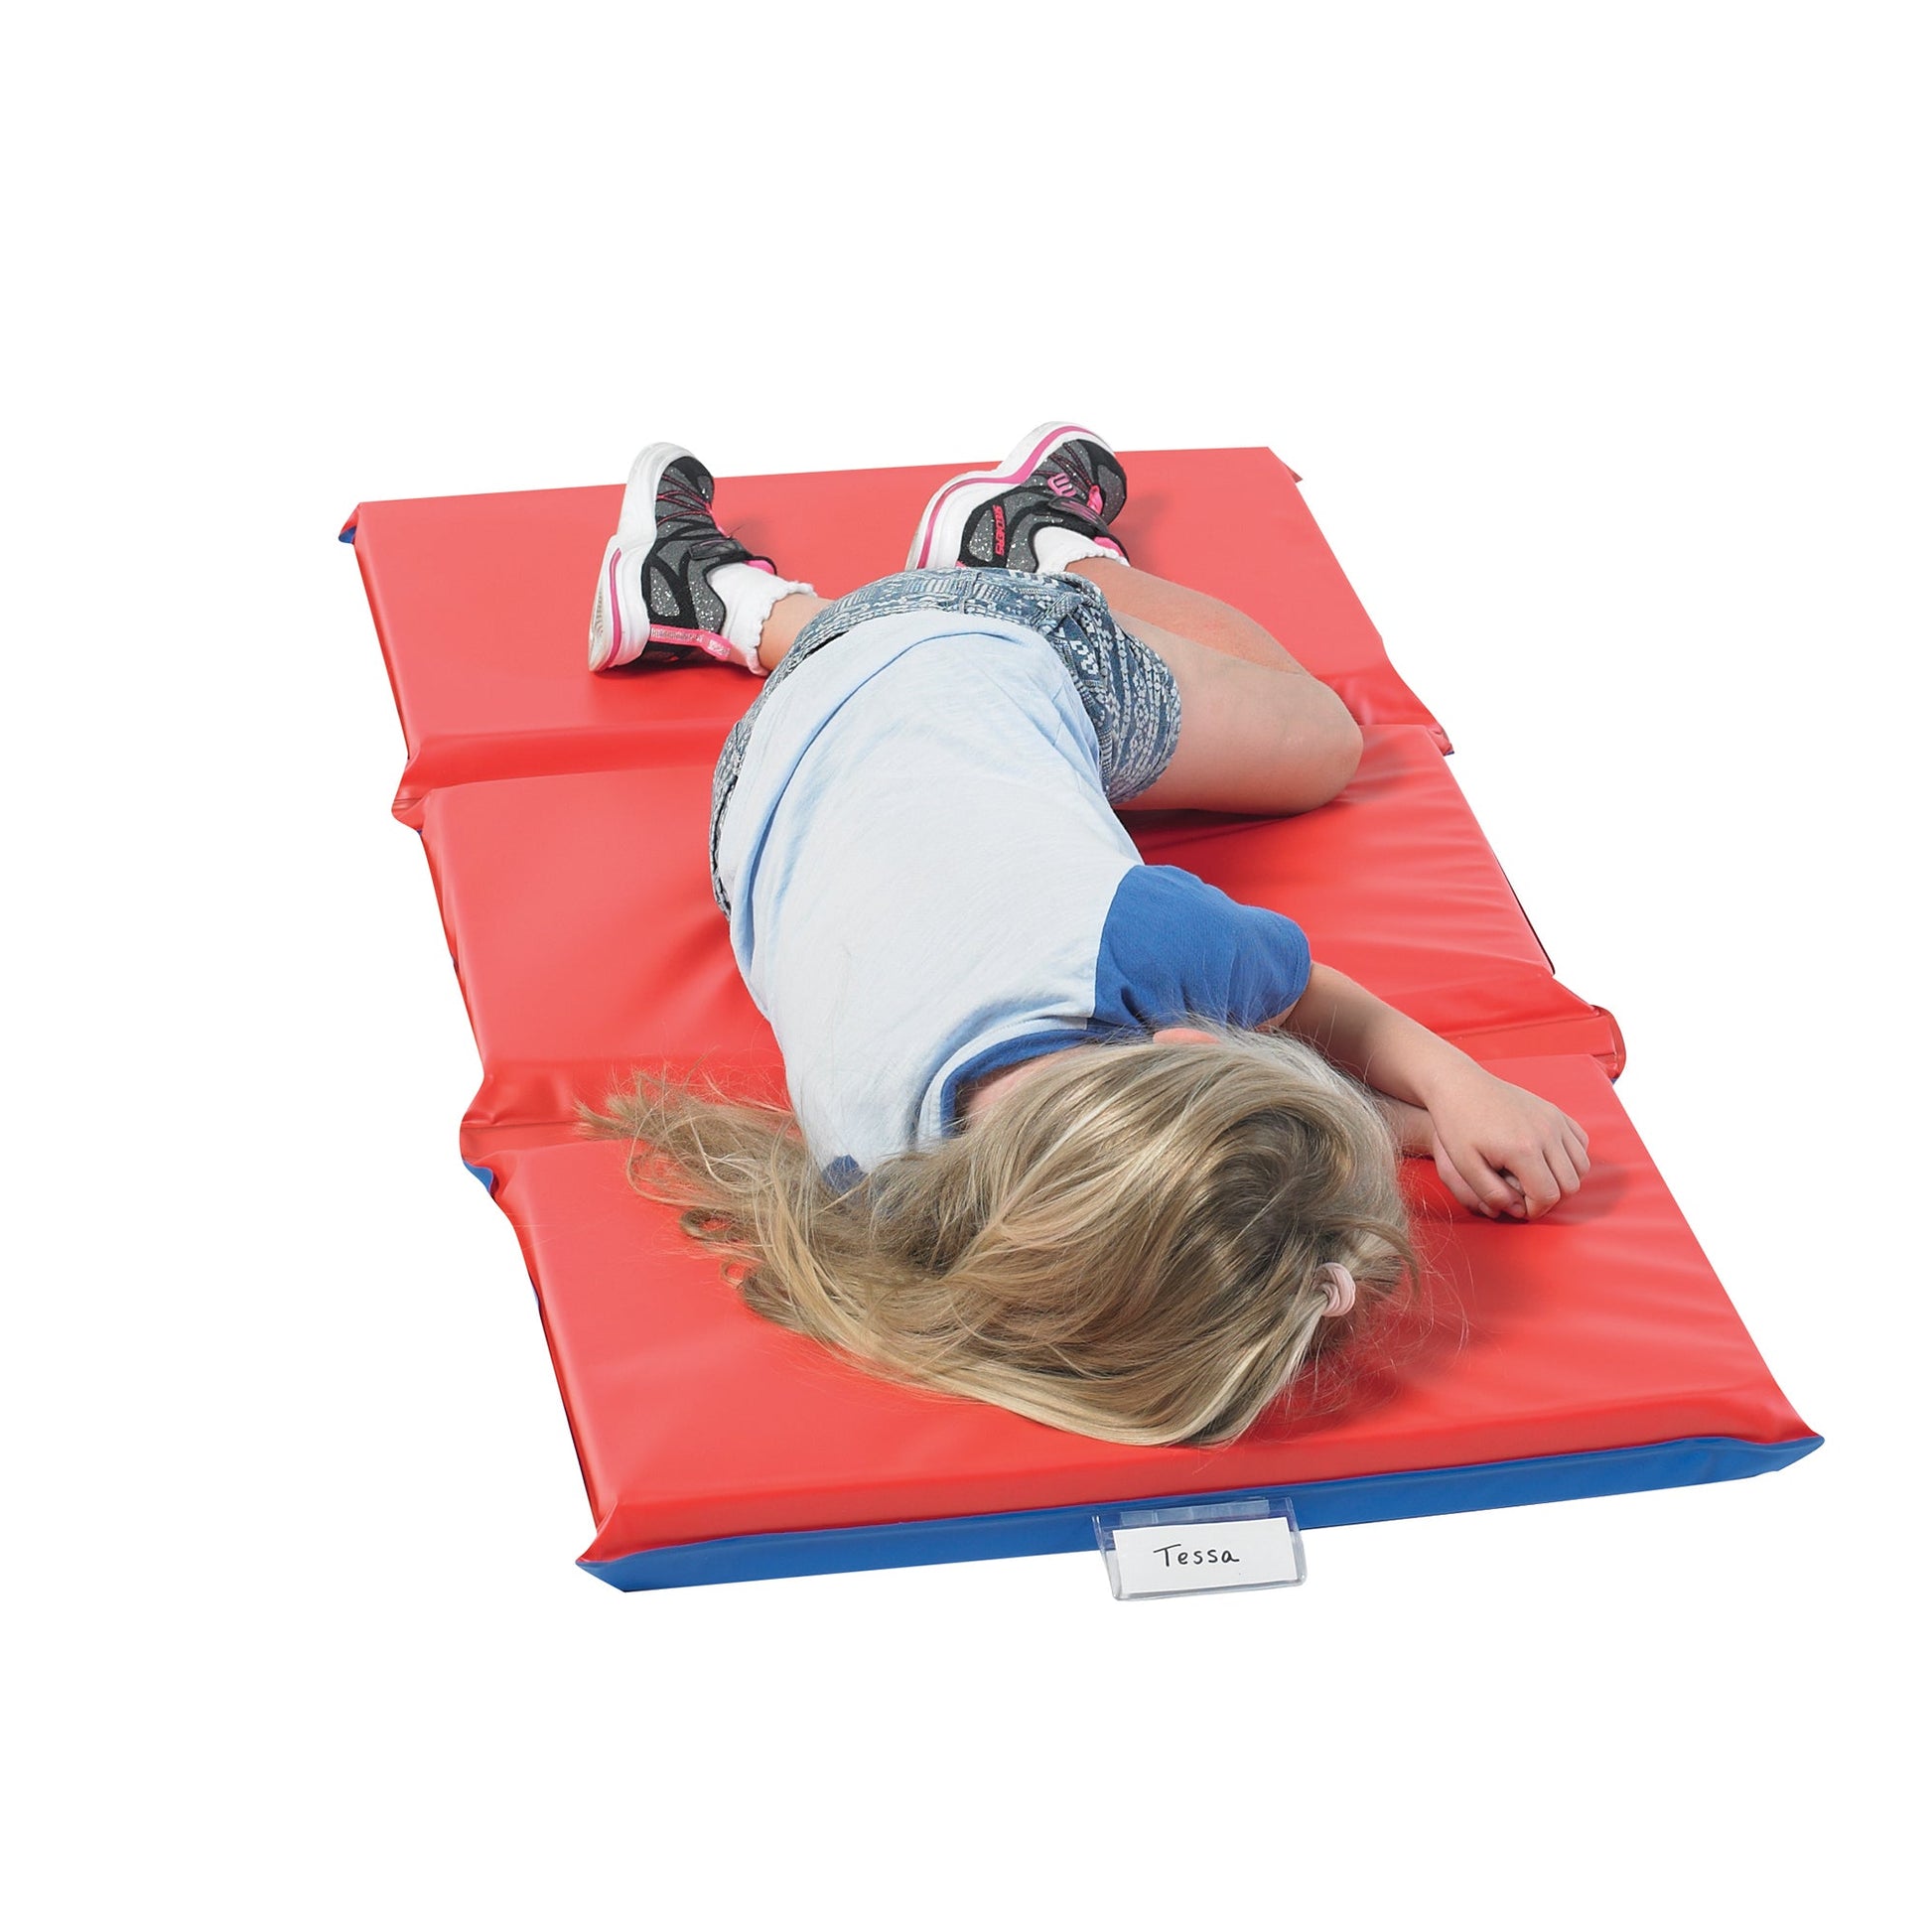 Children's Factory 2" Infection Control 3 Section Folding Rest Mat - Set of 5 - Red/Blue (CF400-513RB) - SchoolOutlet